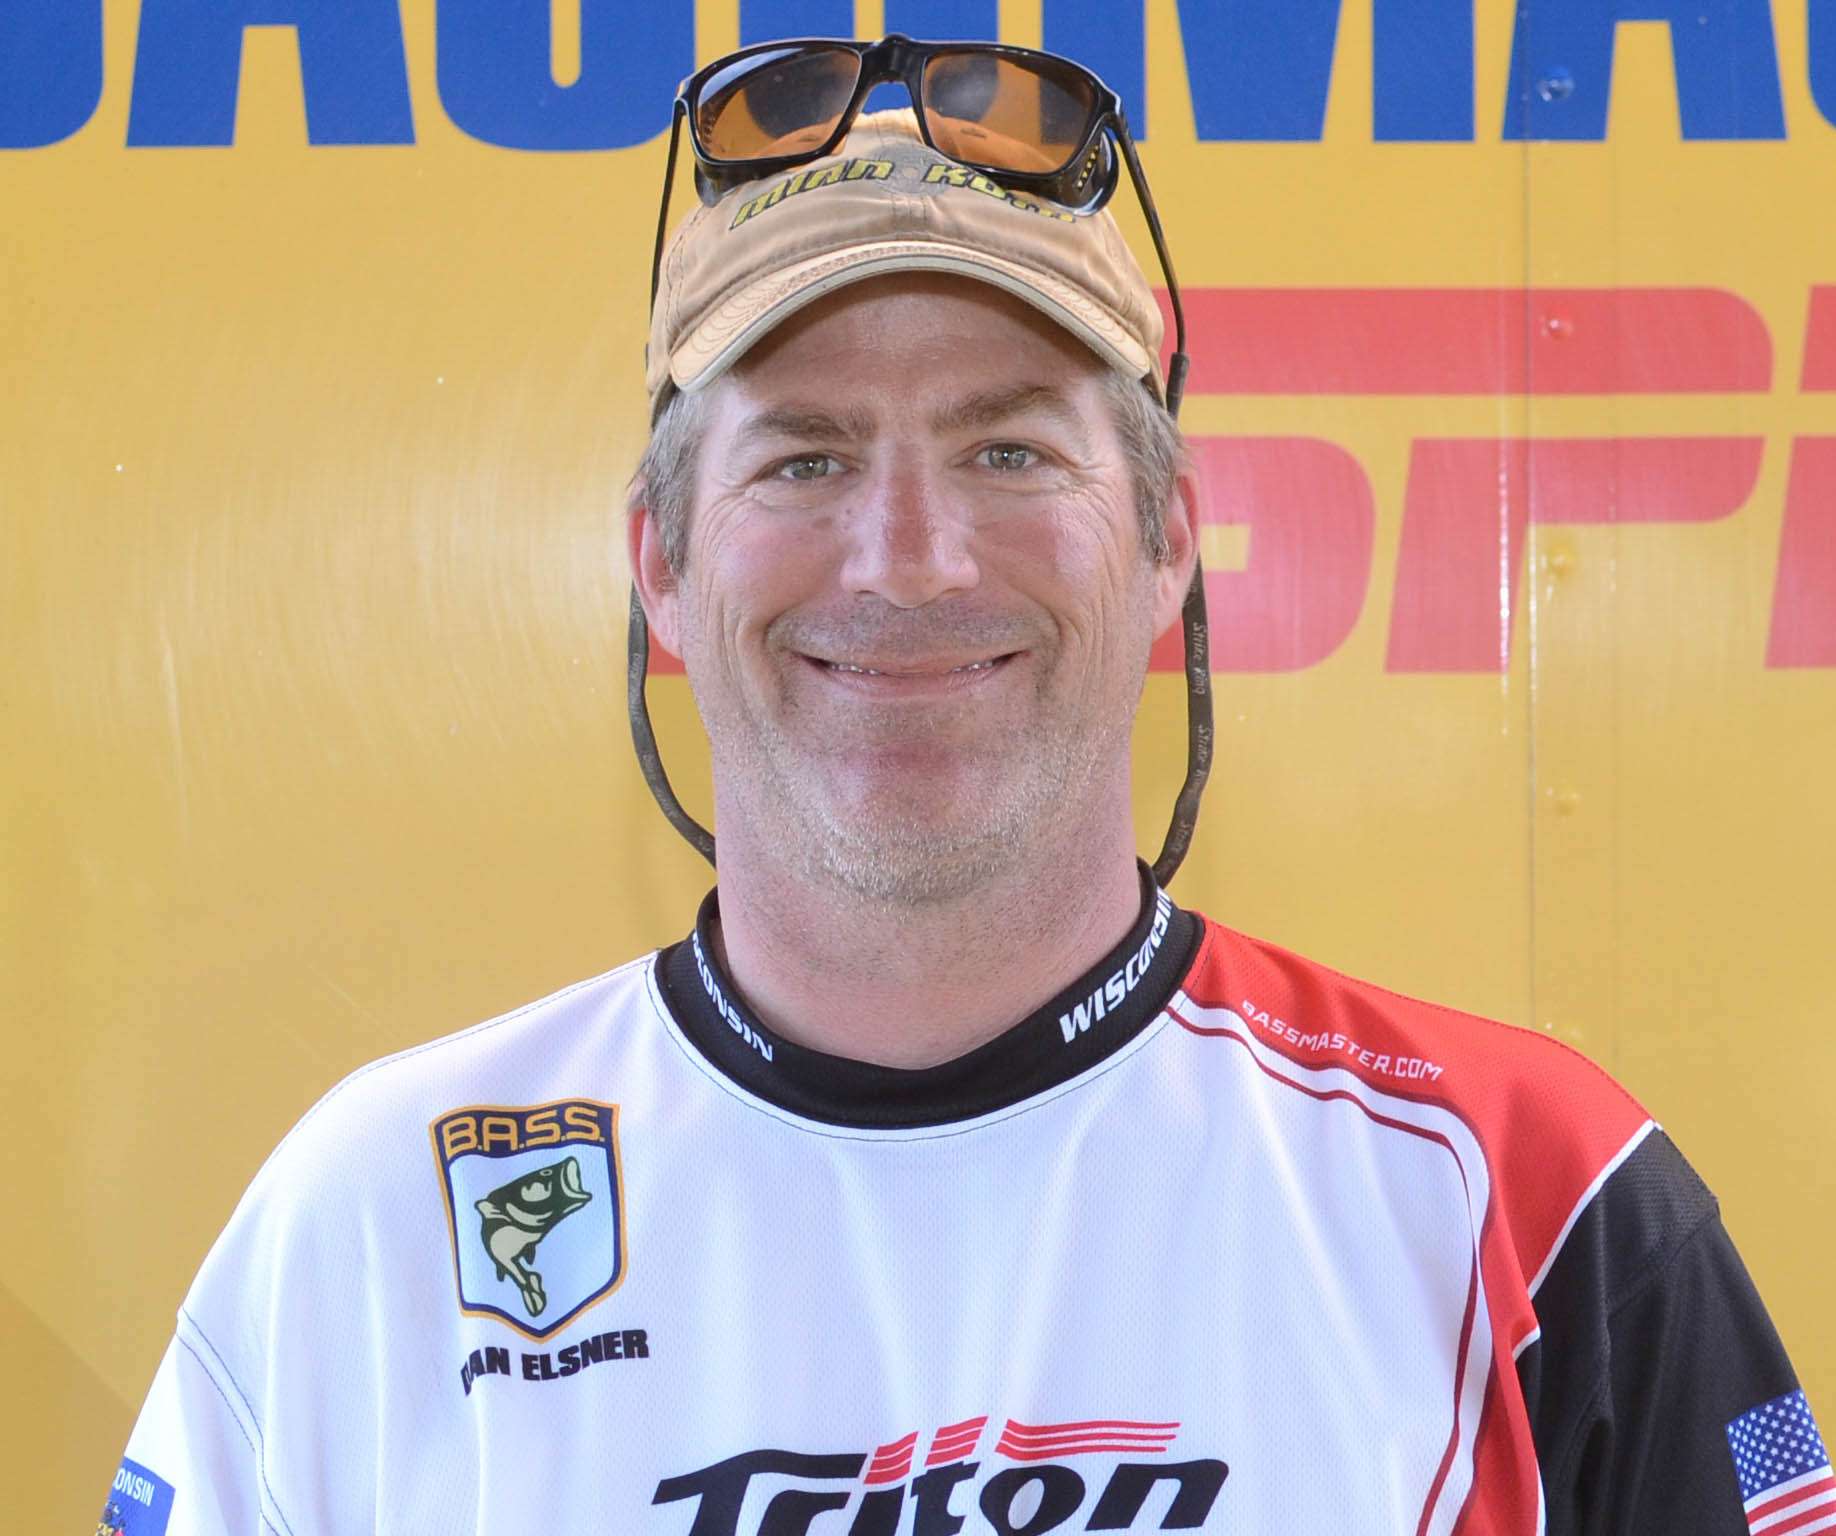 Daniel Elsner <br>
Wisconsin Nonboater <br>
Daniel Elsner owns two businesses, Construction Specialists and Get Bit Baits. The Great Lakes Bassmasters member likes video games, movies and music. This championship will be his first. Elsner is sponsored by Get Bit Baits, RPM Custom Rods and Dirty Jigs Tackle. 